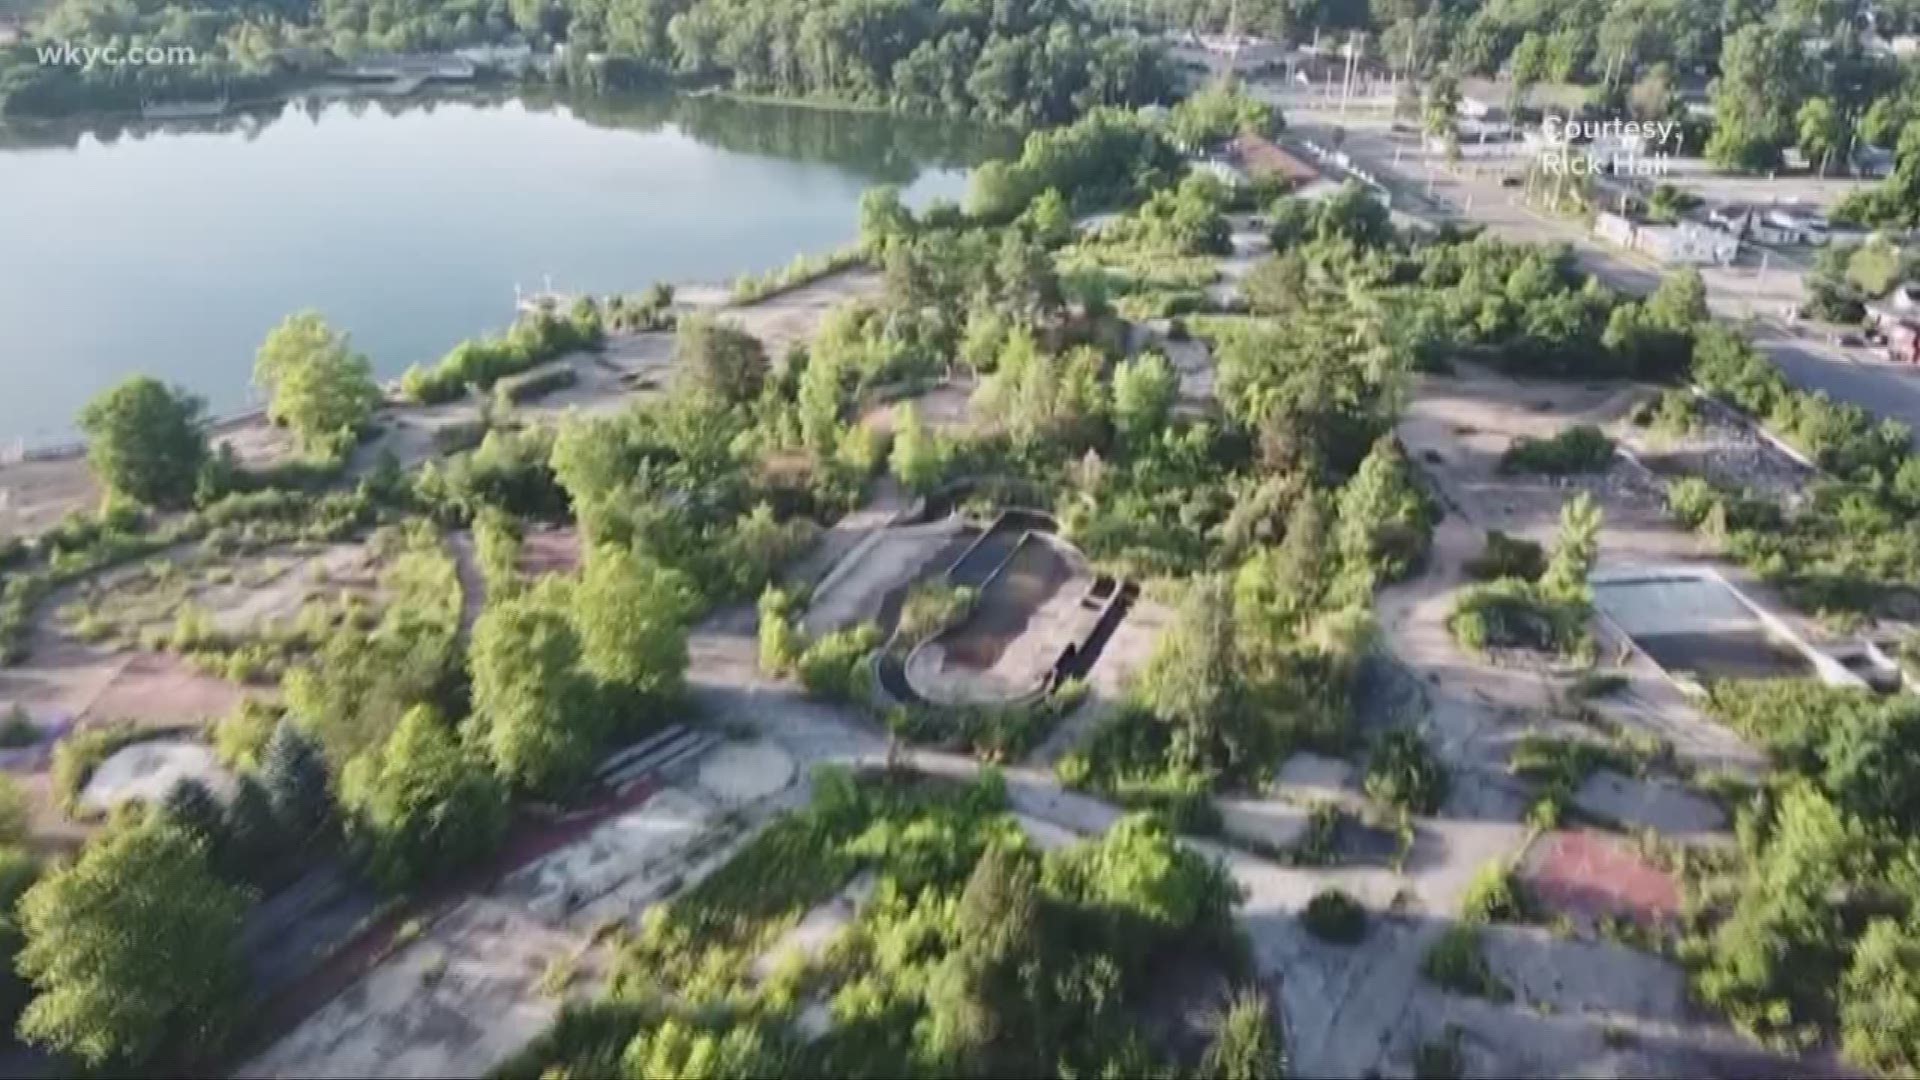 Geauga Lake could soon be a step closer to a new life. Not as another amusement park, but rather, a neighborhood with homes and a big park.